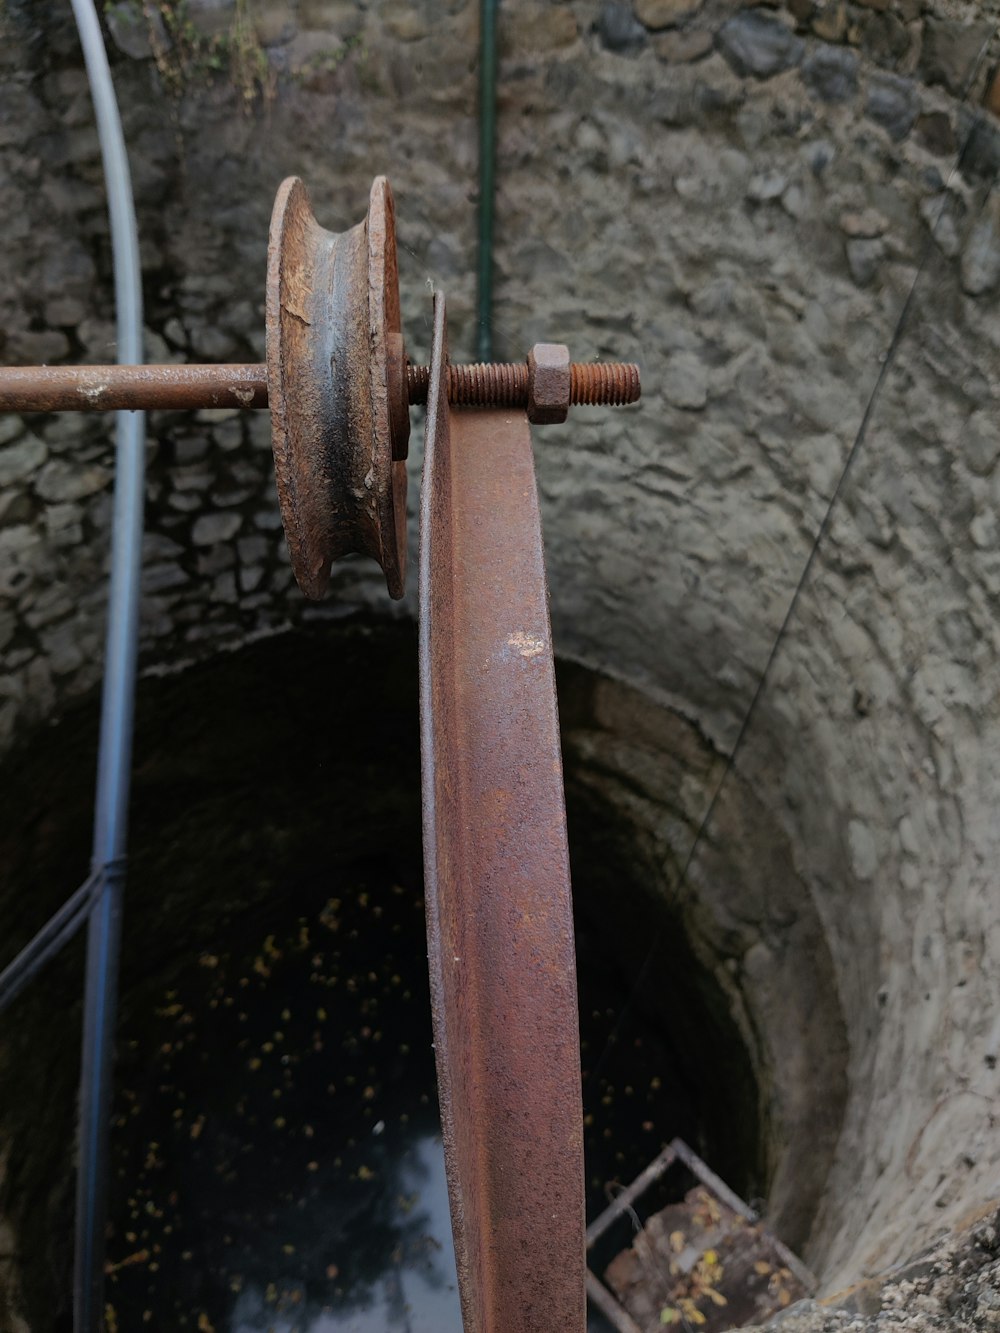 a rusty pipe with a rusted handle in a well